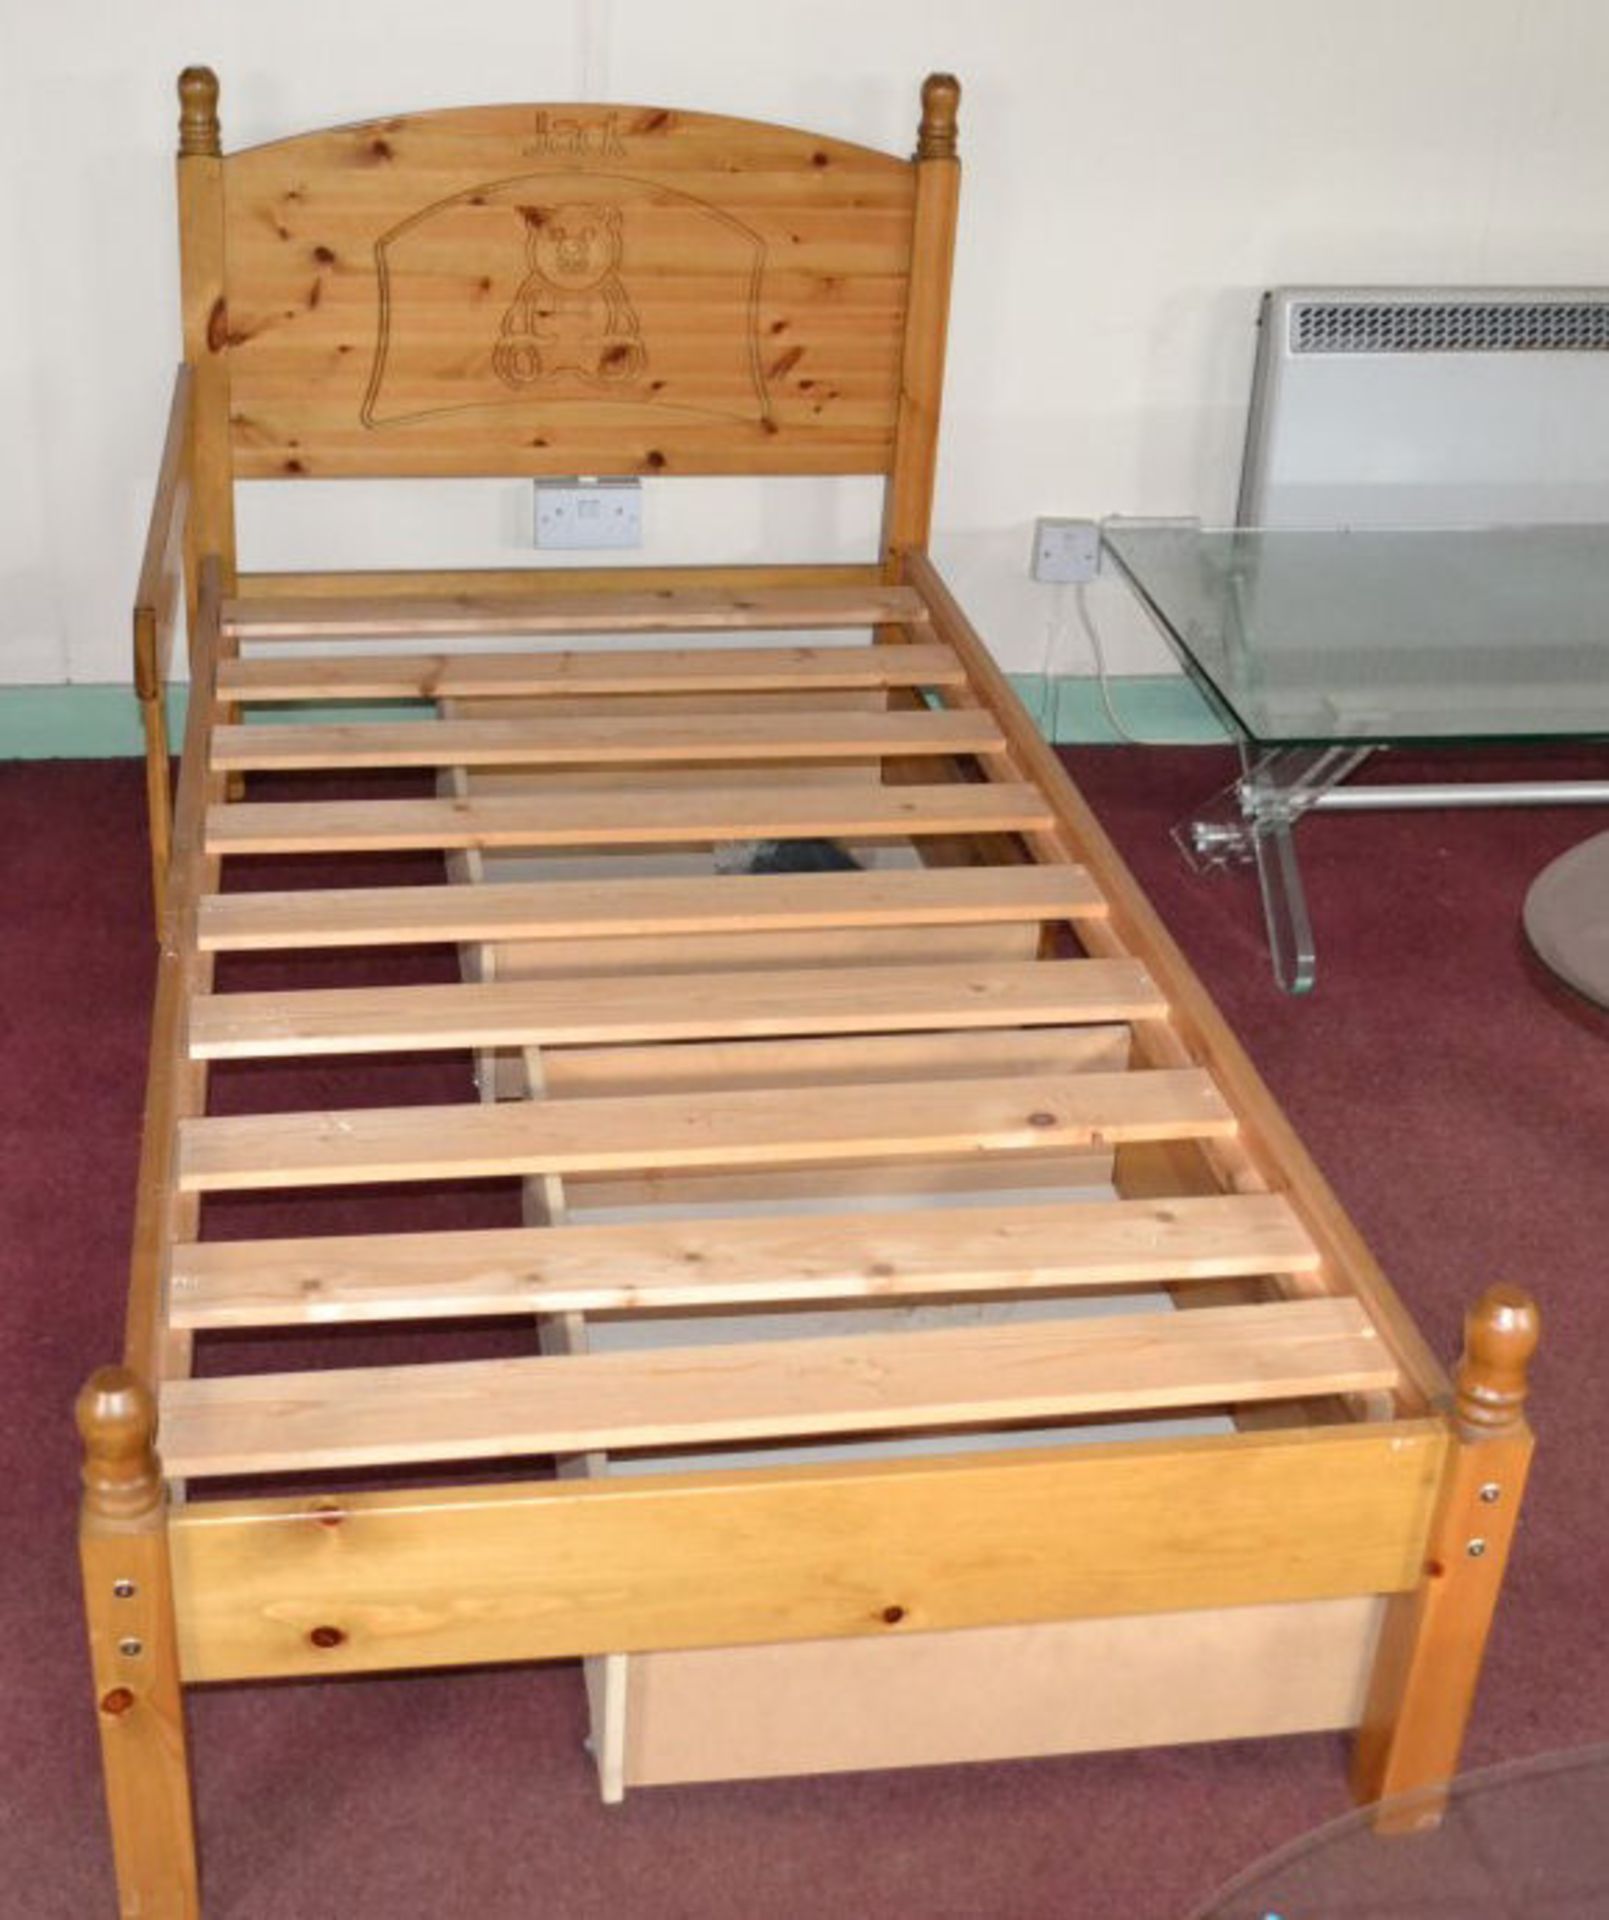 1 x Childs Pine Bed with Teddy Bear Logo And Name Jack On Headboard - Image 2 of 6